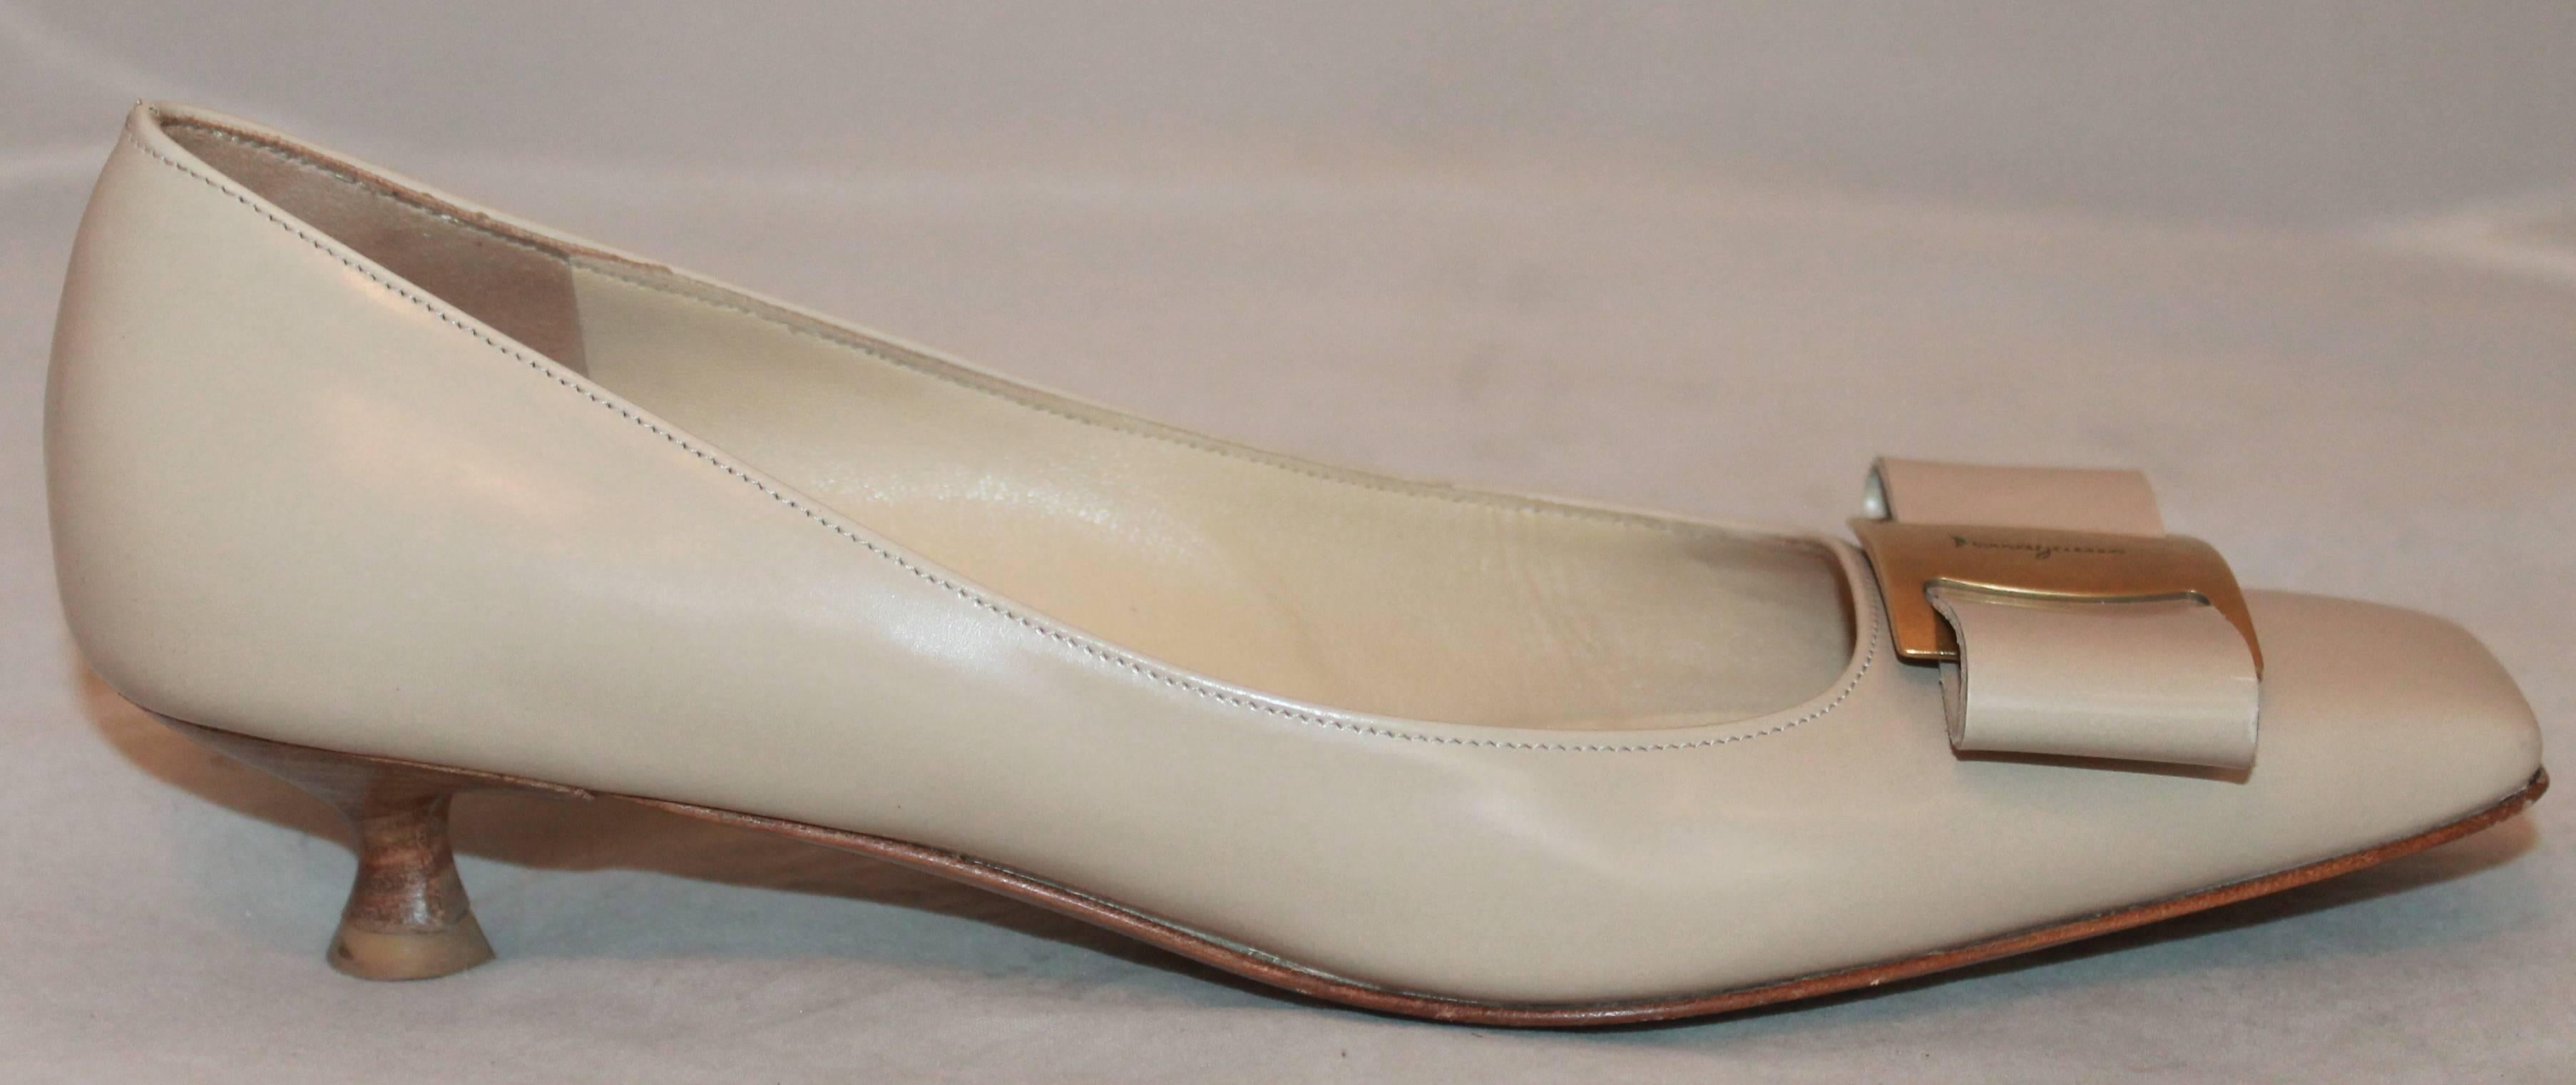 Salvatore Ferragamo Tan Leather Classic Kitten Heel Pump w/ Front Gold - 7AA.  These shoes are in excellent condition aside from some wear on the sole from use.  They feature a lovely tan leather, kitten heels, front bows with gold 